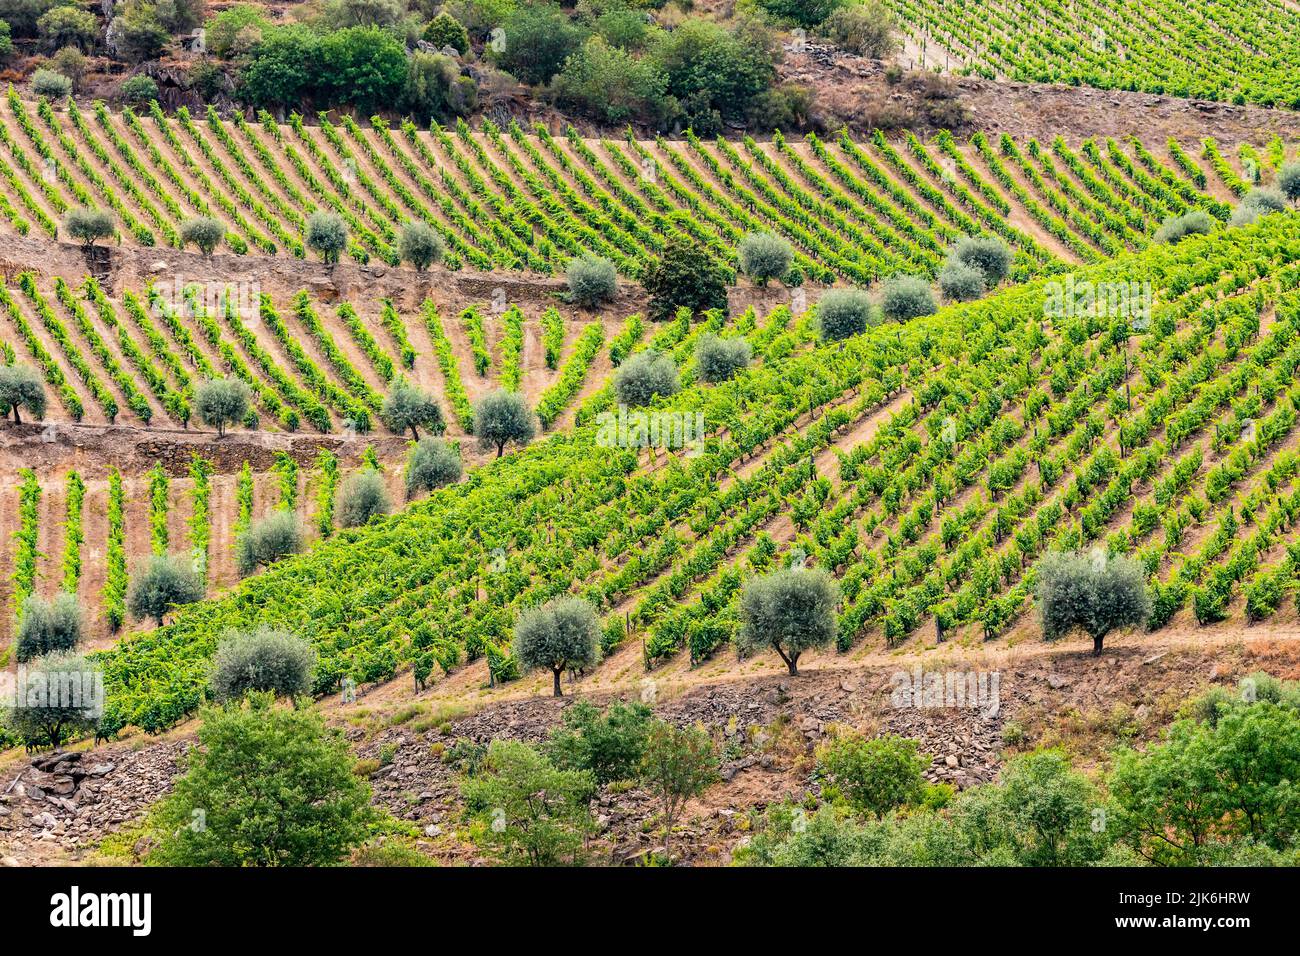 Grape vines and single olive trees along the Douro River in Portugal Stock Photo